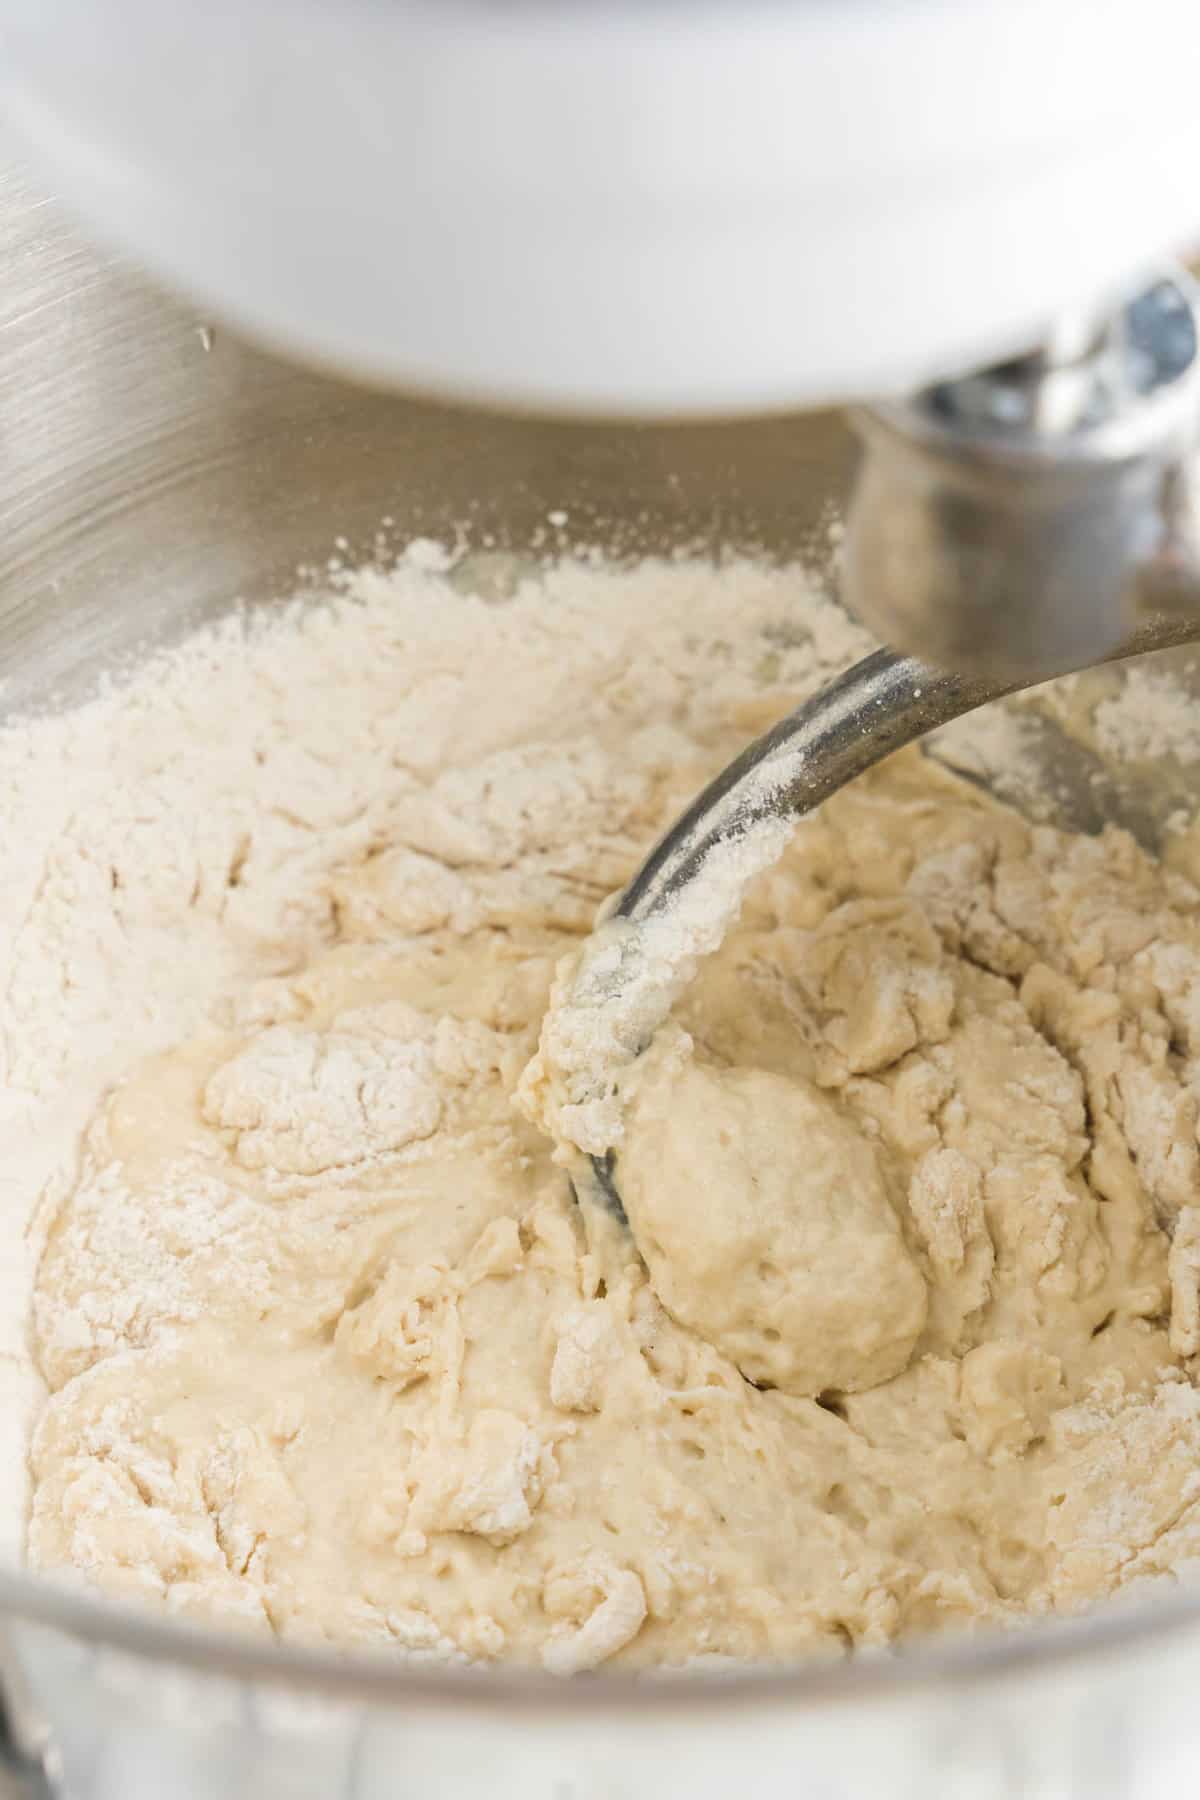 Mixing Easy Homemade Pizza Dough with a stand mixer using a dough hook